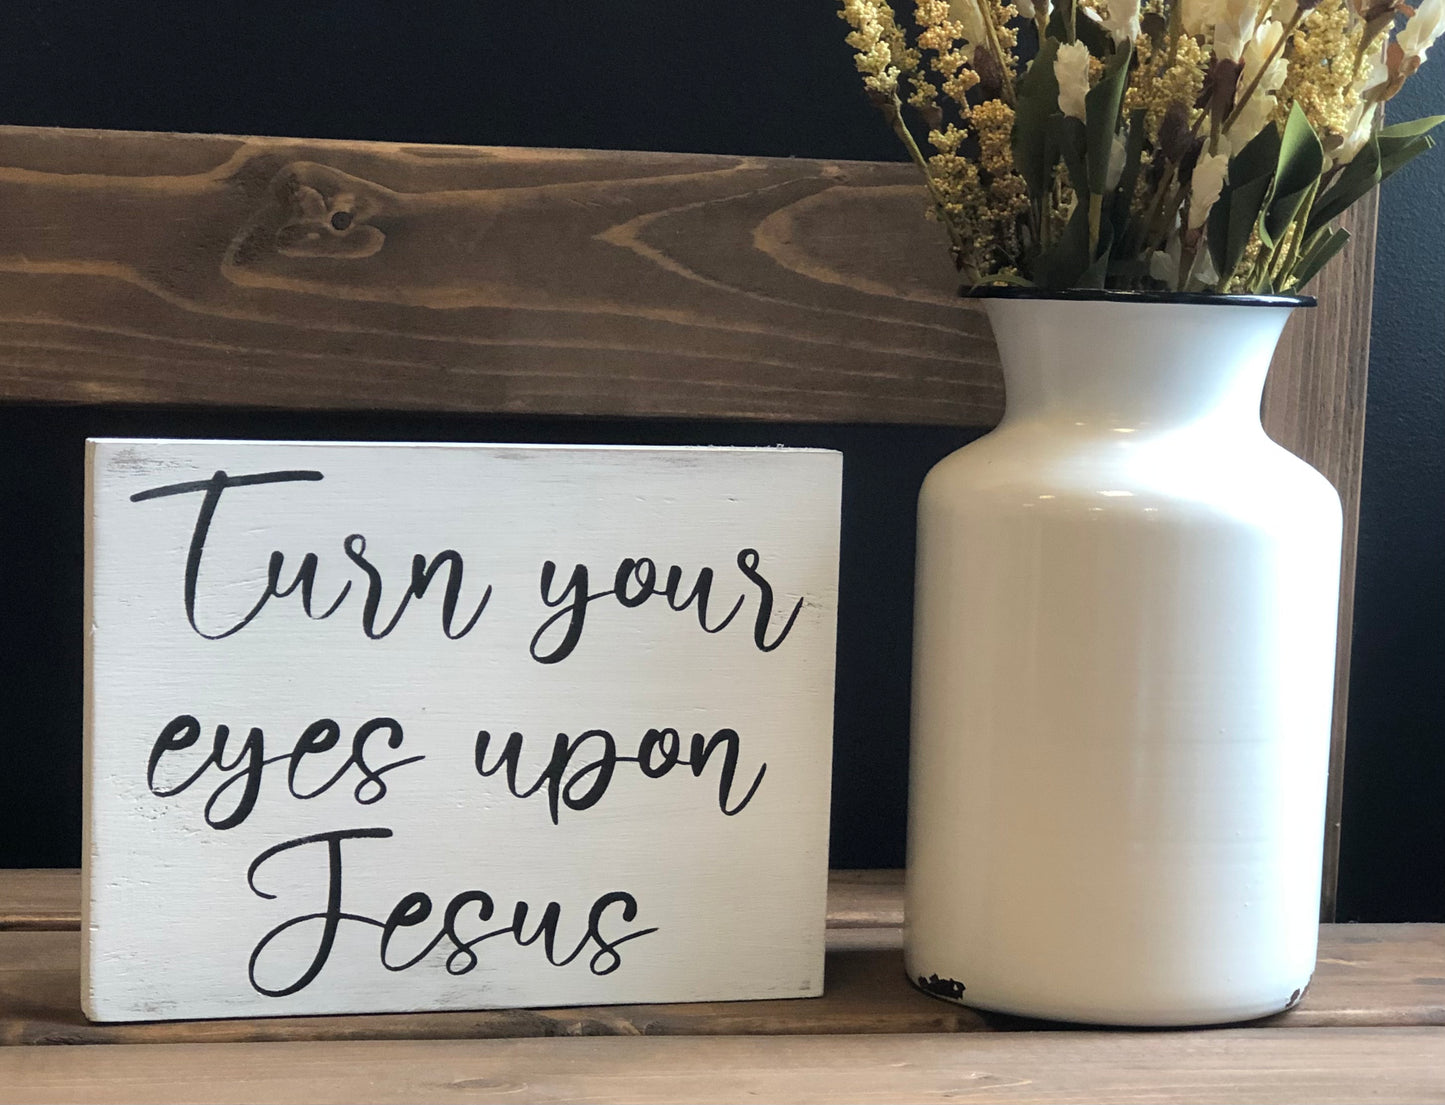 Turn Your Eyes Upon Jesus - Rustic White Wood Sign